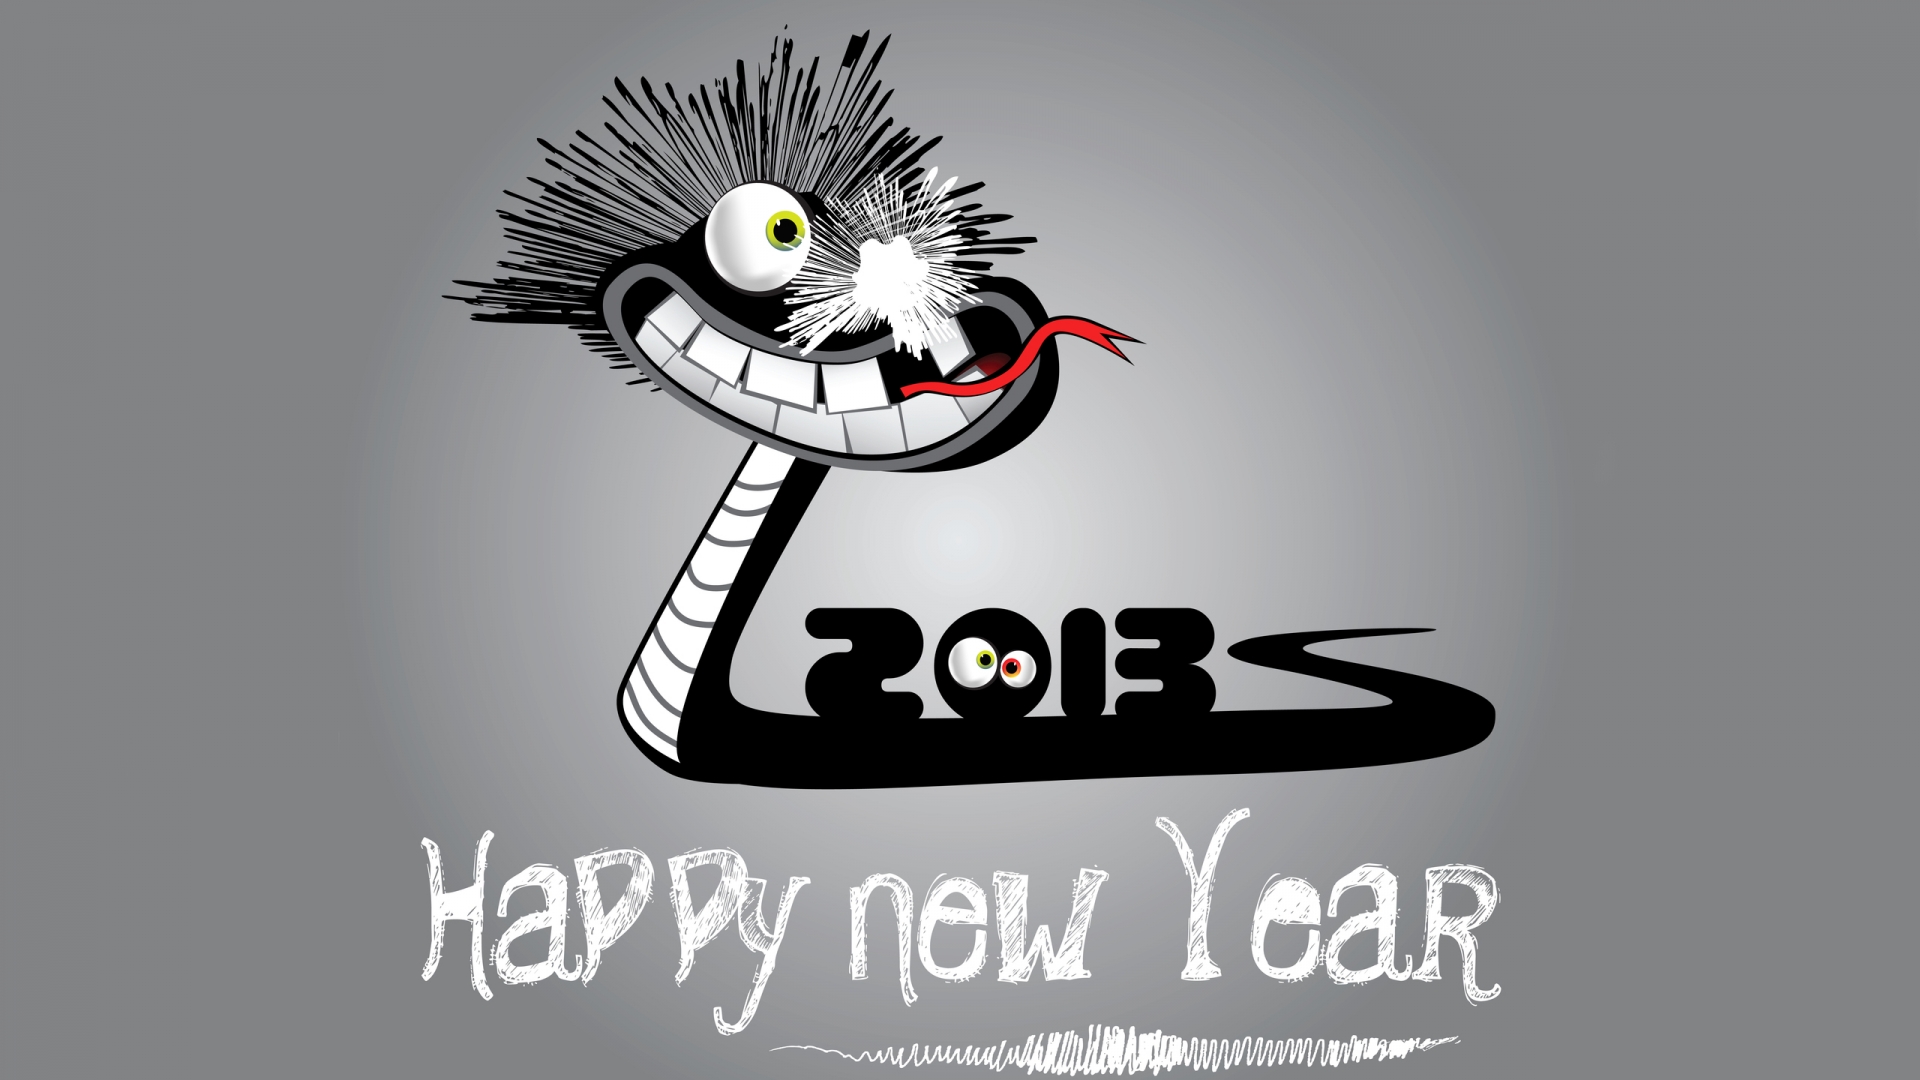 2013 Happy New Year for 1920 x 1080 HDTV 1080p resolution